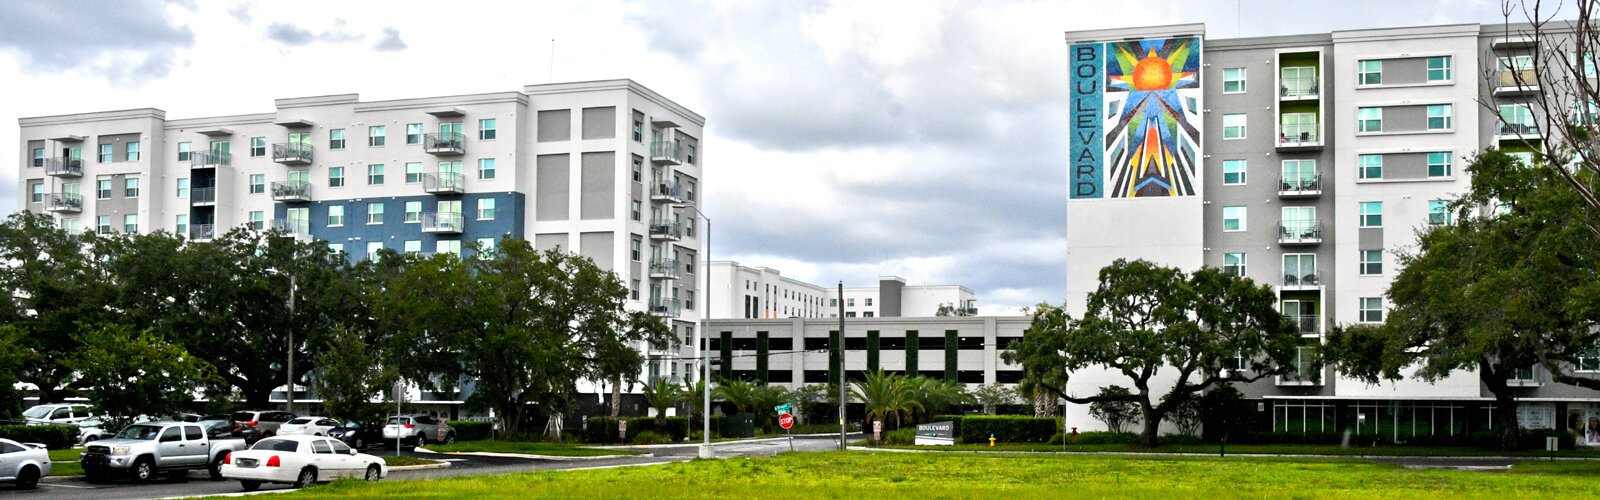 The Boulevard Towers are part of the West River redevelopment, a partnership between the Tampa Housing Authority and the Related Group to bring affordable and market-rate housing and retail to the property where North Boulevard Homes once stood.